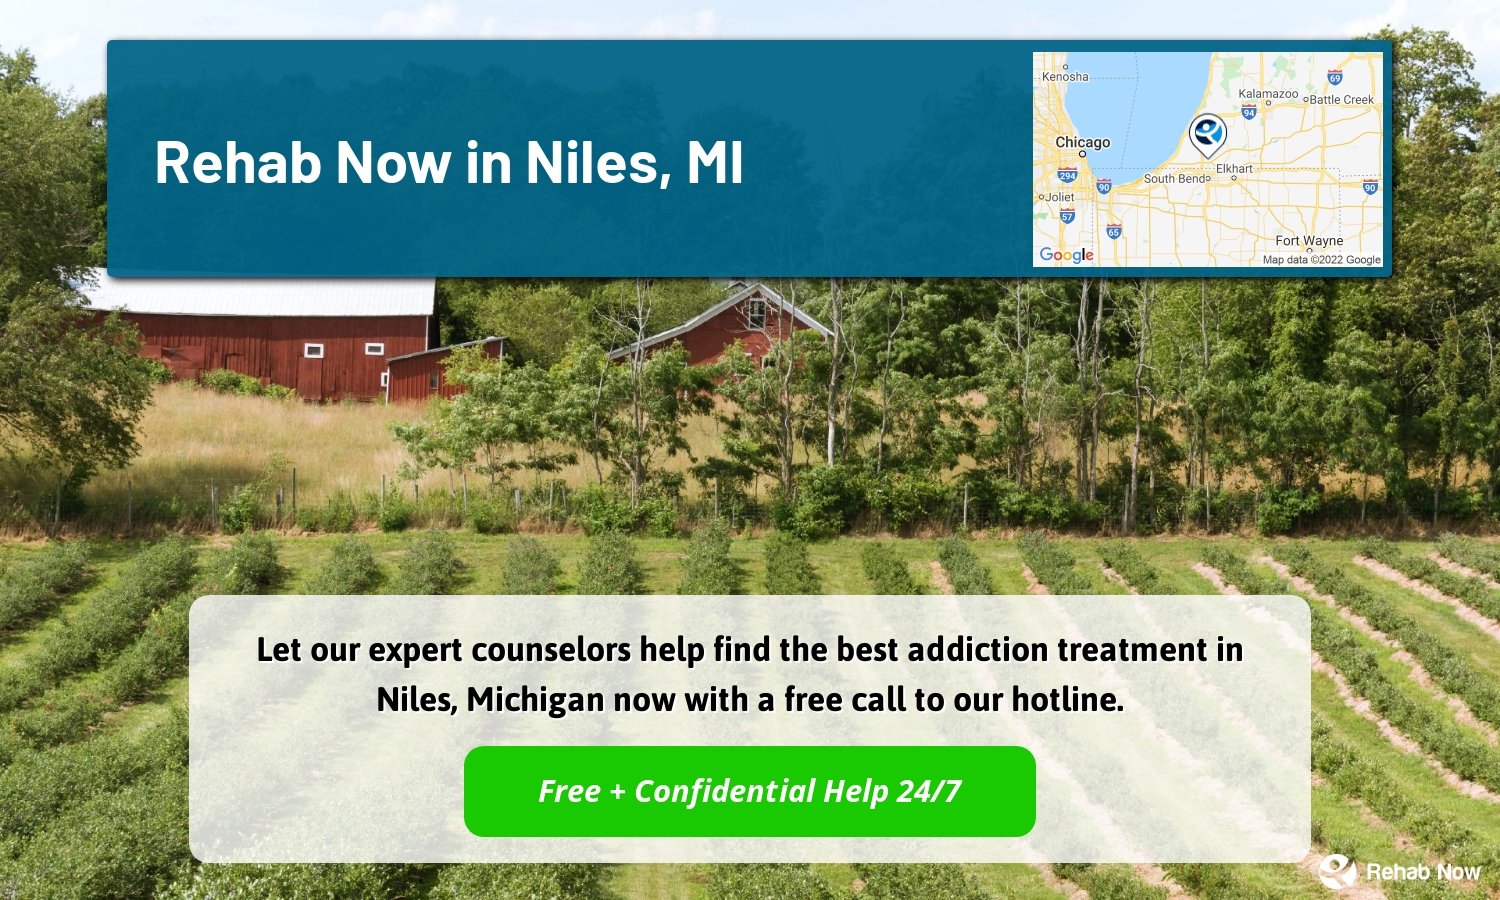 Let our expert counselors help find the best addiction treatment in Niles, Michigan now with a free call to our hotline.